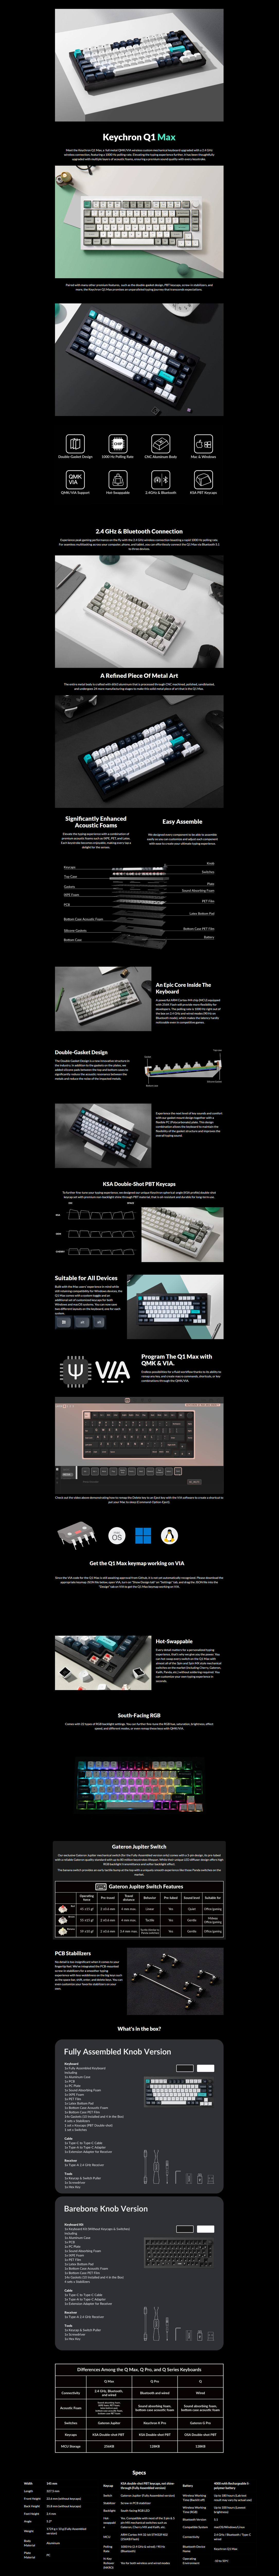 A large marketing image providing additional information about the product Keychron Q1 Max QMK/VIA Wireless Custom Mechanical Keyboard Shell White (Gateron Jupiter Brown Switch) - Additional alt info not provided